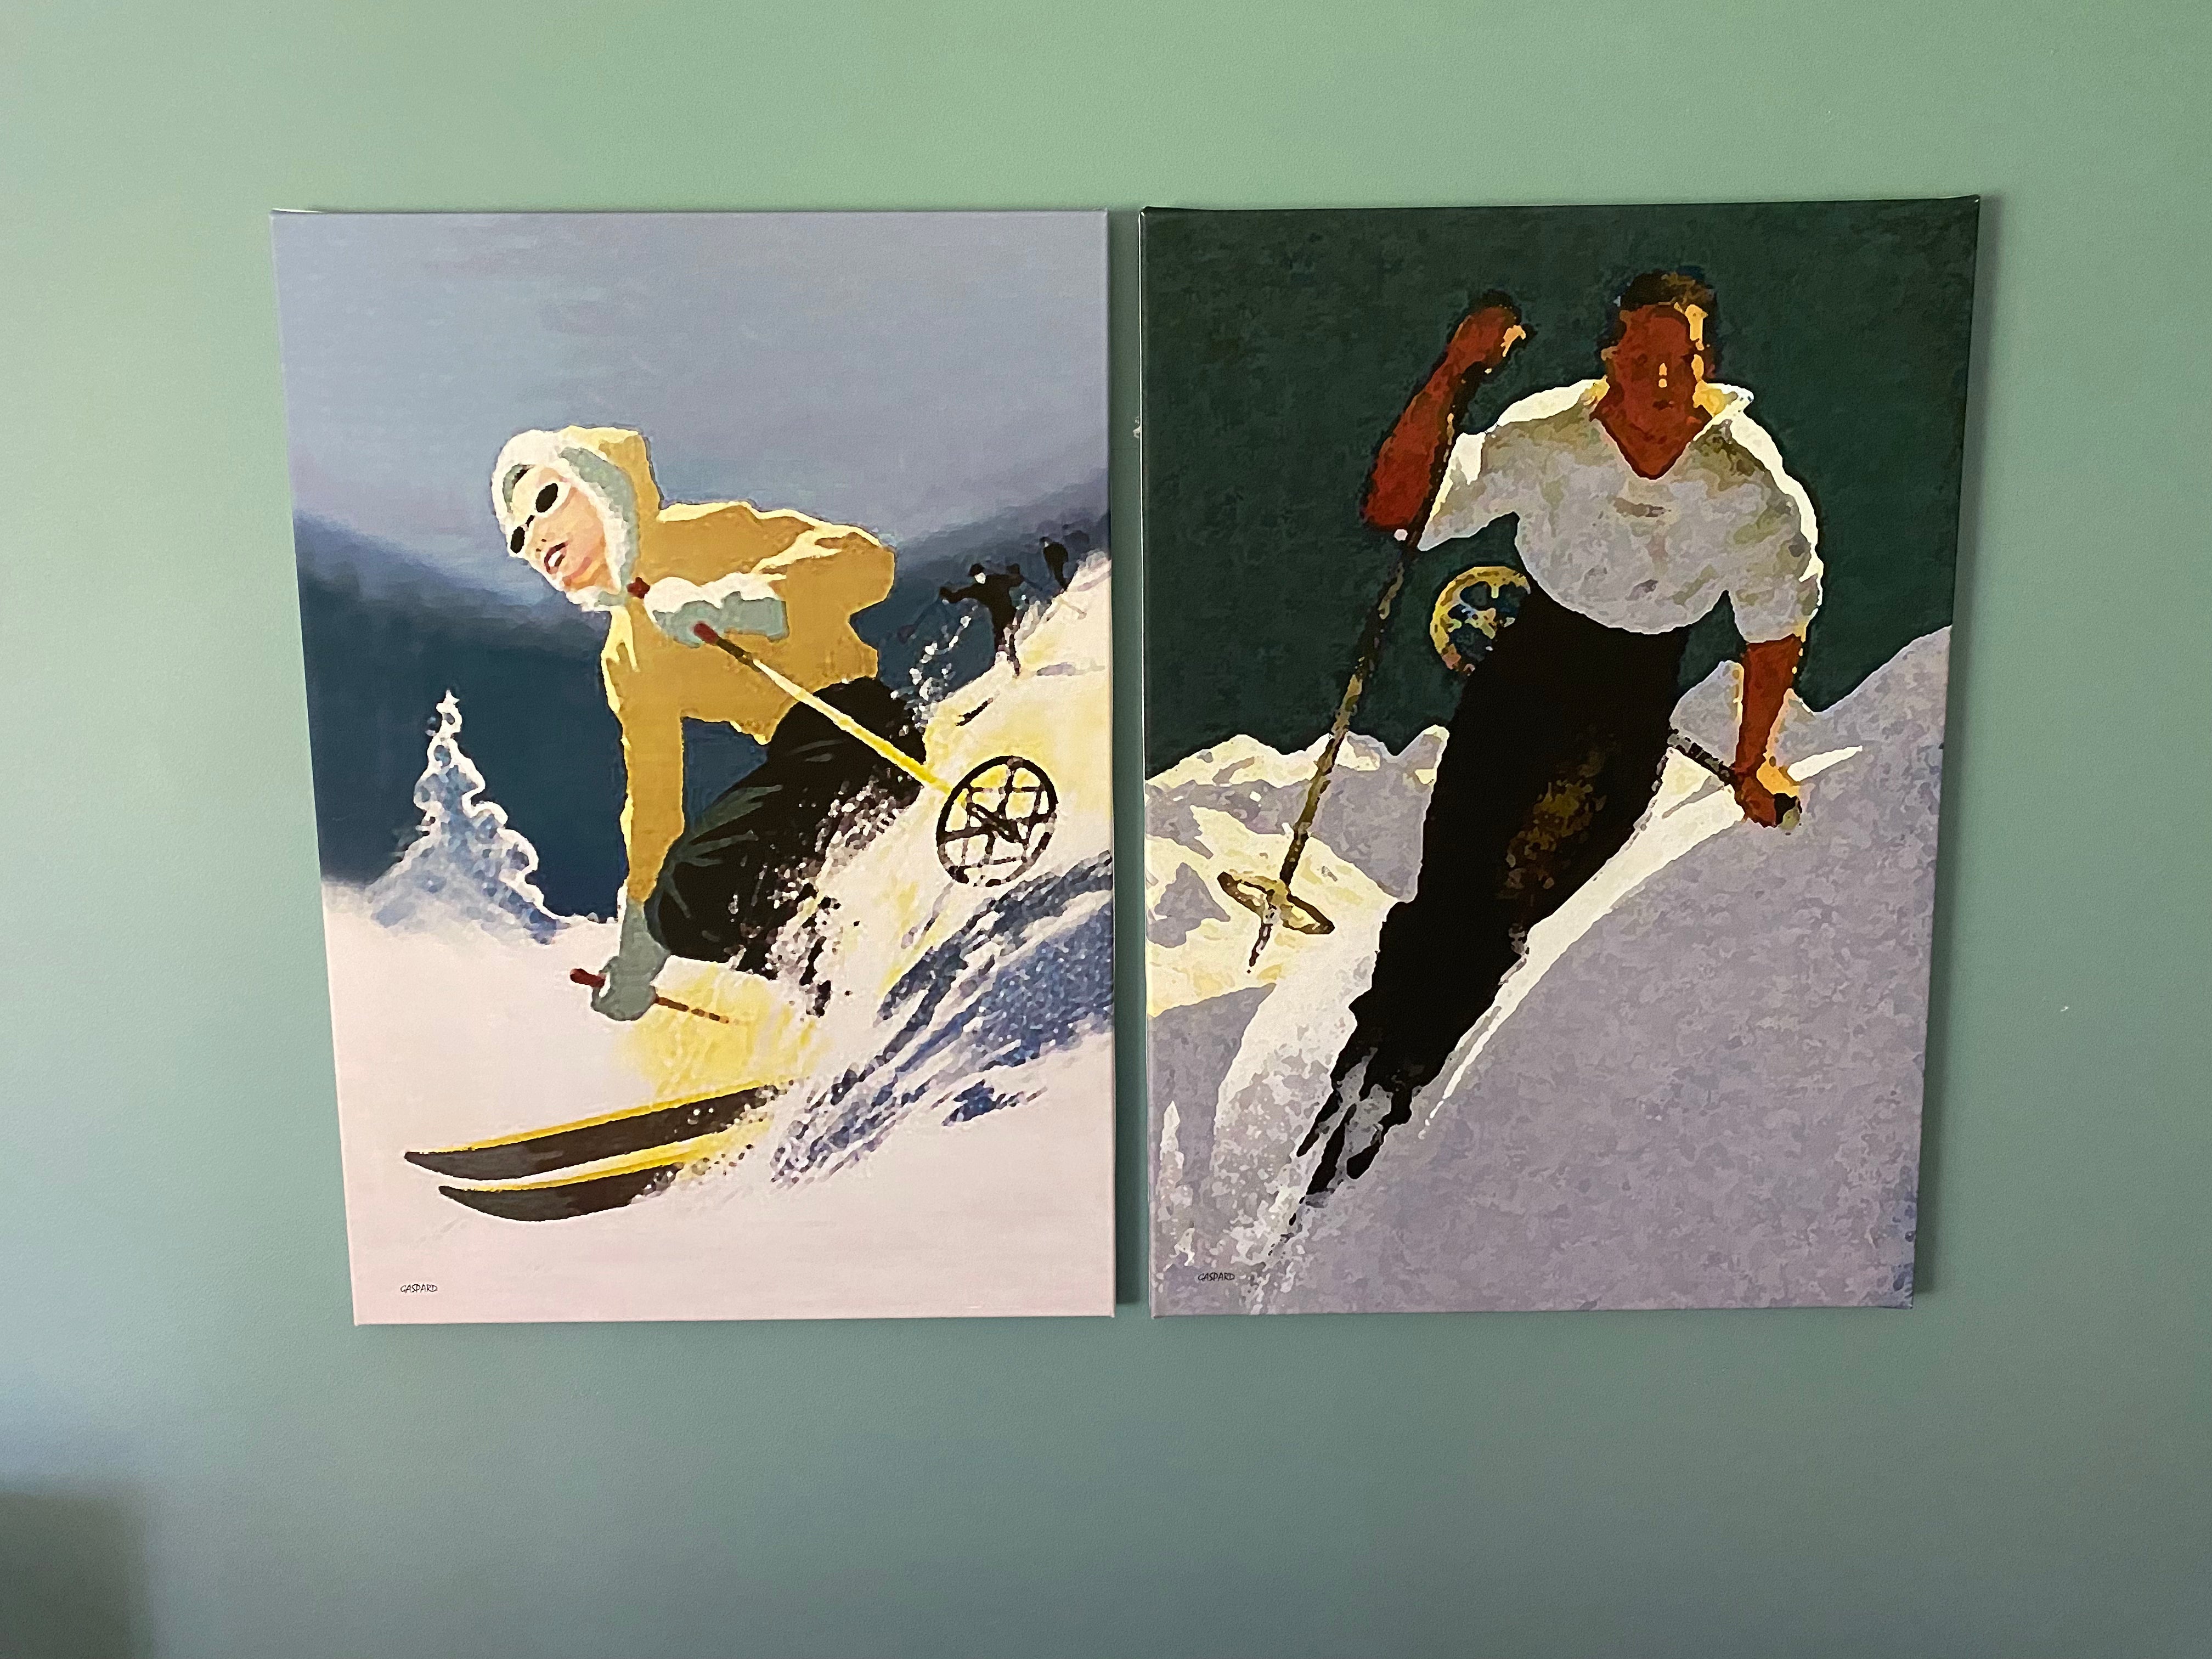 a man in a white shirt and blue pants skiing downhill, leaning left into the hill with mountains in the background below a dark green-blue tinged sky. Hanging next to a canvas depicts a woman in a yellow jacket with a white fur at the edge of the hood and blue pants skiing downhill, leaning to the right into the hill with a tree and the shadow of the mountains in the background below a blue sky. Hanging on a green wall.